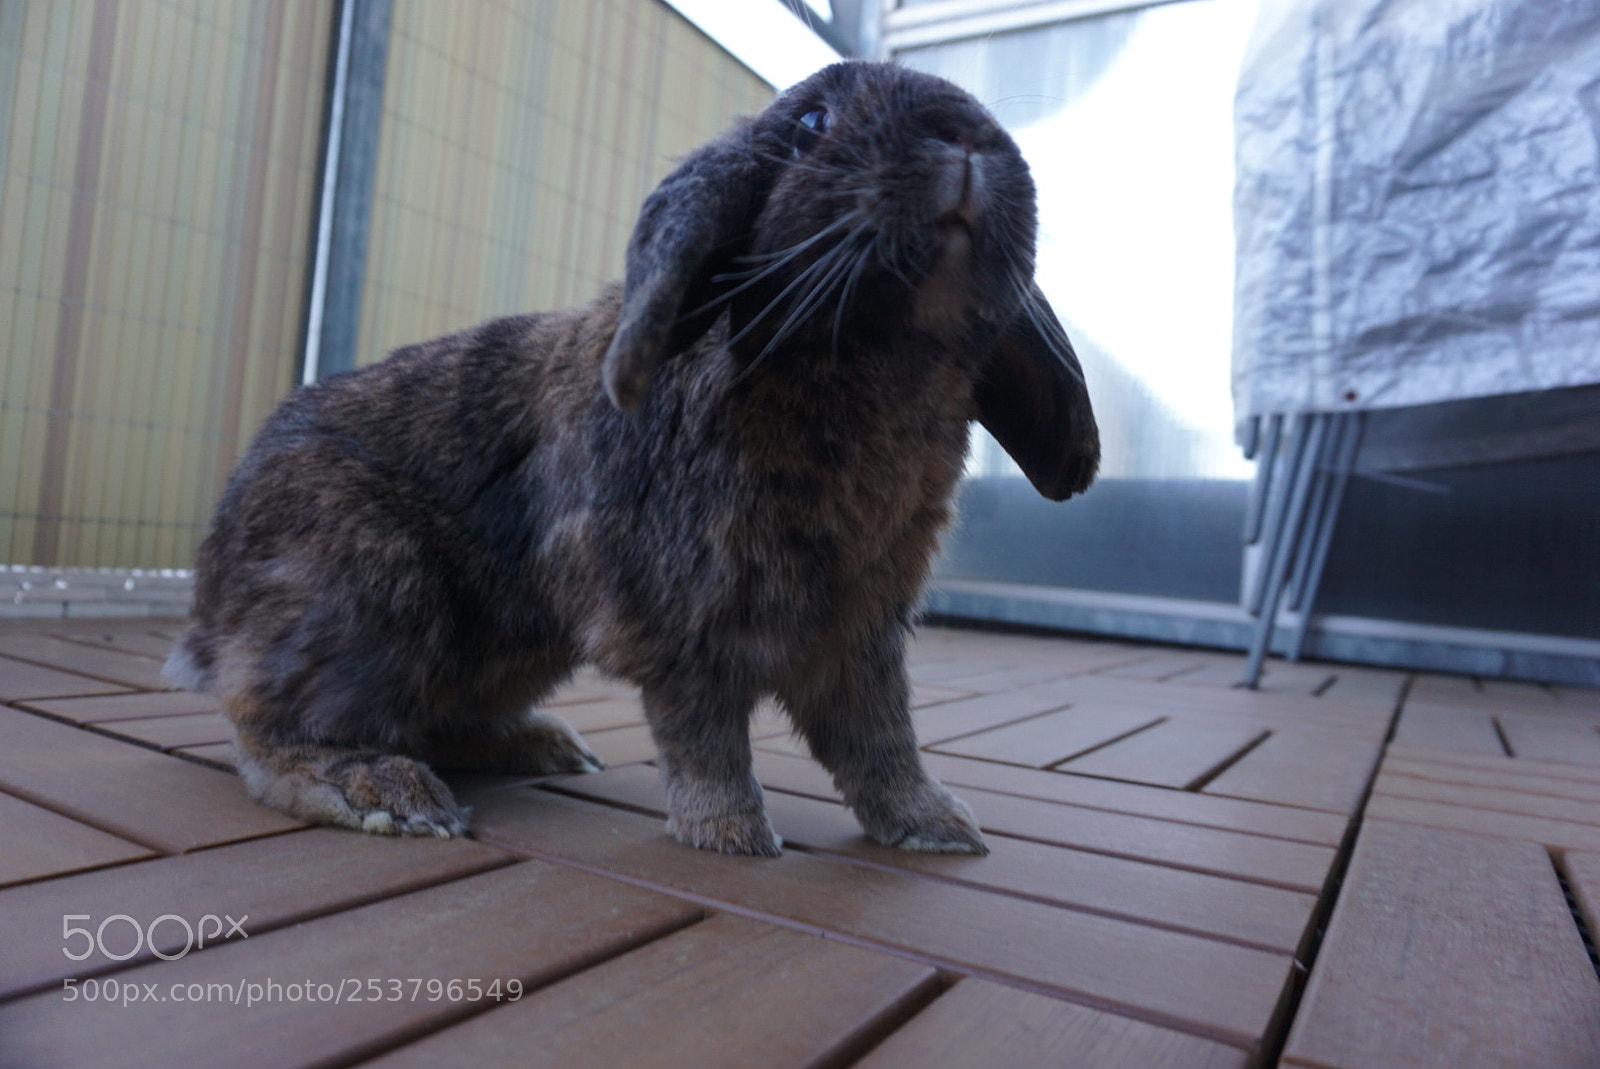 Sony a6000 sample photo. My profile picture | rabbit photography